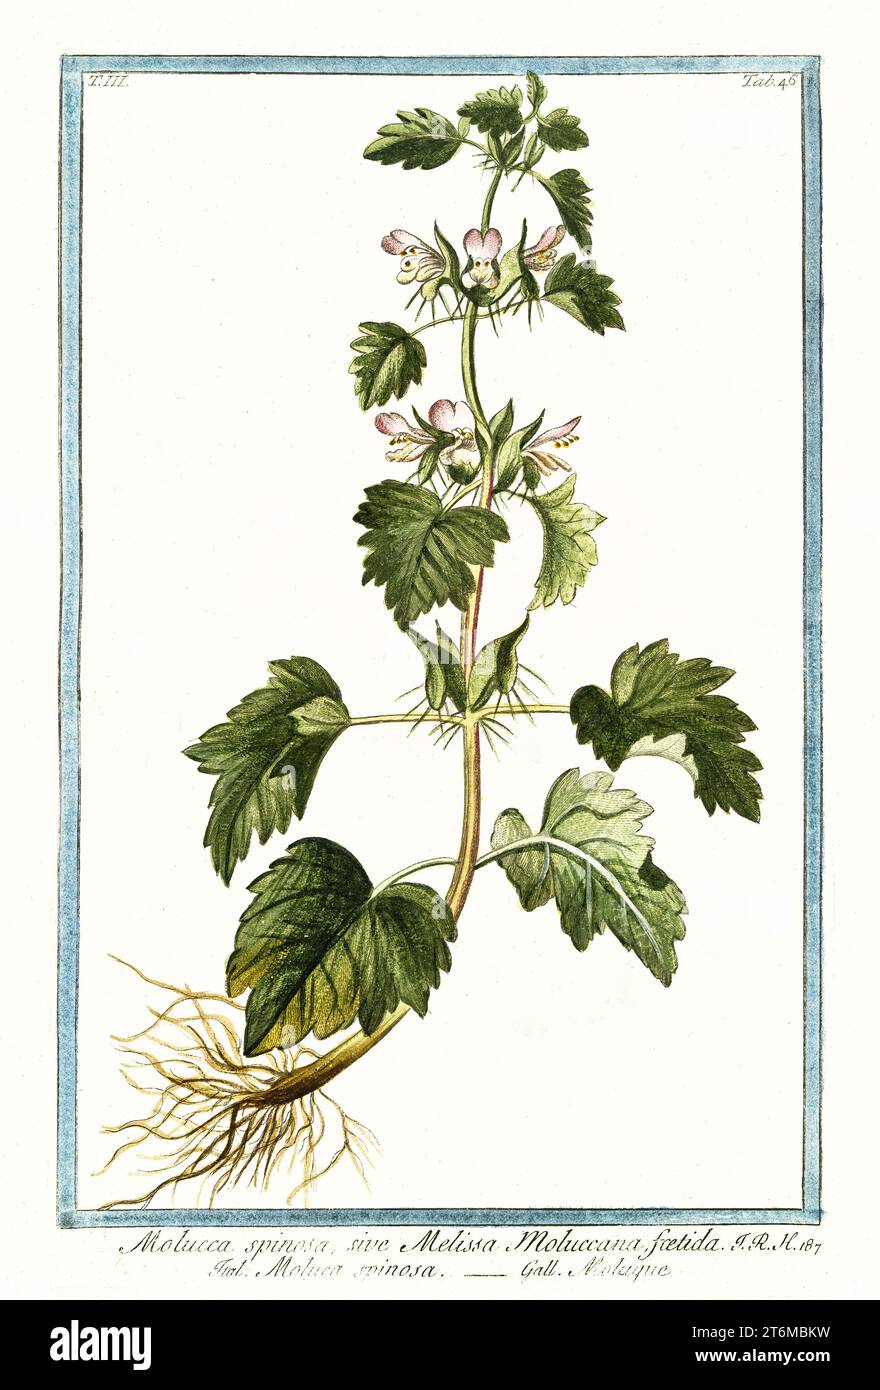 Old illustration of  Moluccella spinosa (Spiny molucca). By G. Bonelli on Hortus Romanus, publ. N. Martelli, Rome, 1772 – 93 Stock Photo